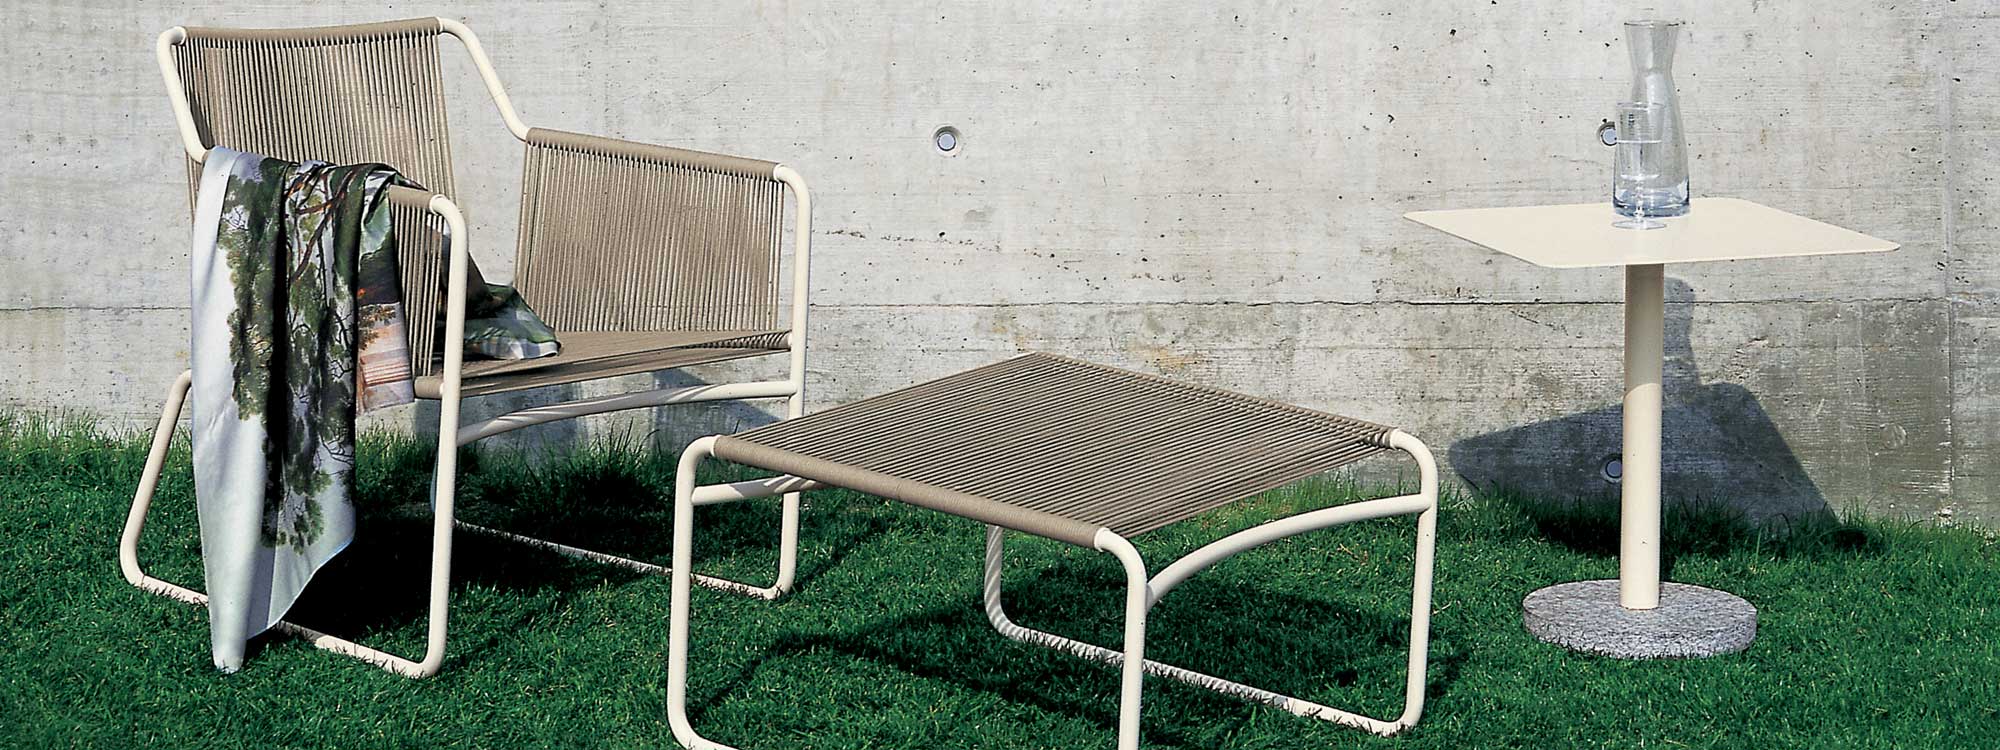 Image of RODA Harp outdoor lounge chair & footstool with Bernardo side table on lawn